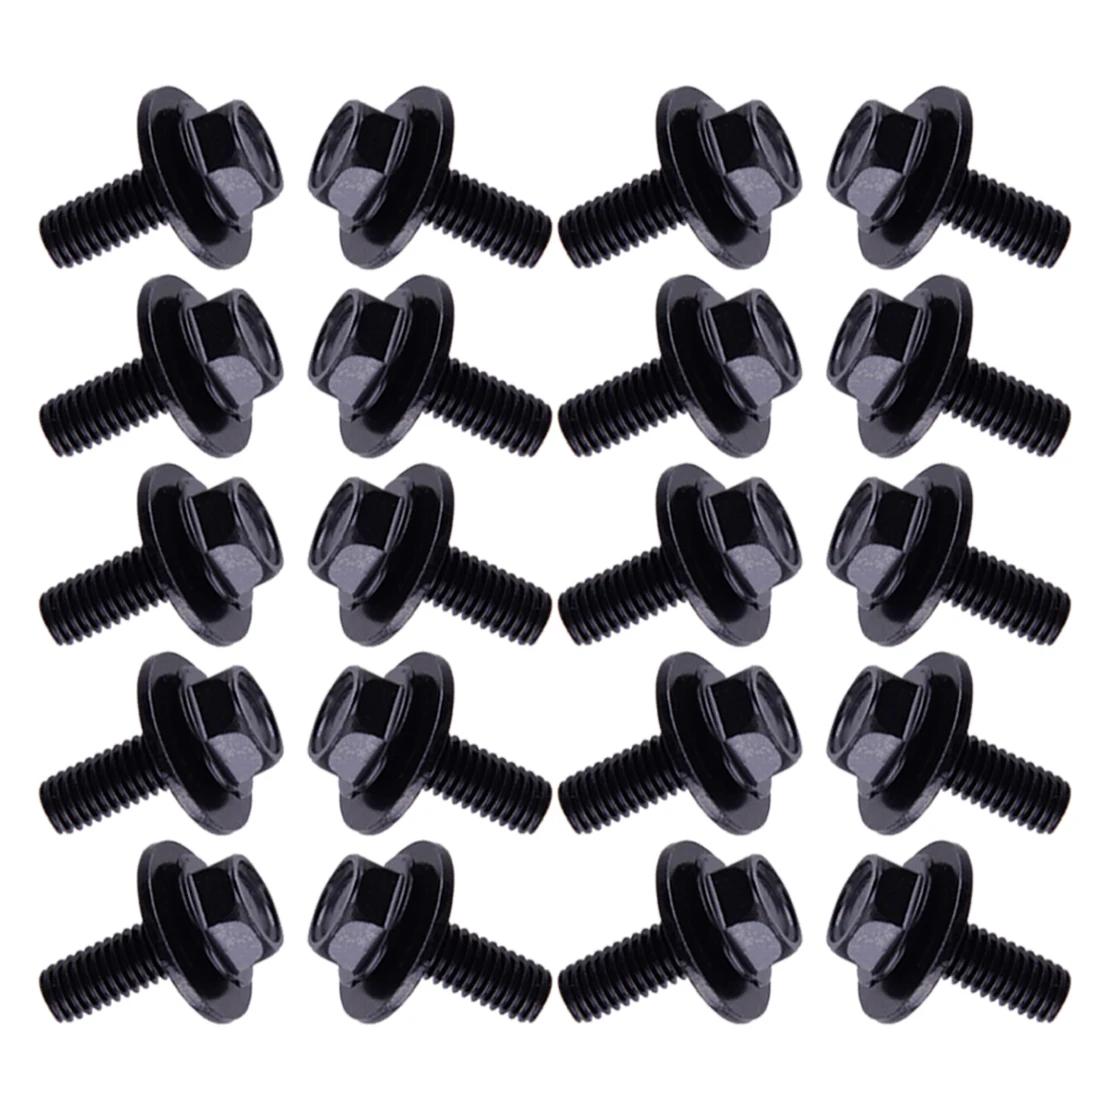 20pcs/Set Black Front Left Lower Rear Right Upper Body Bolts Screws M6 for Universal Cars